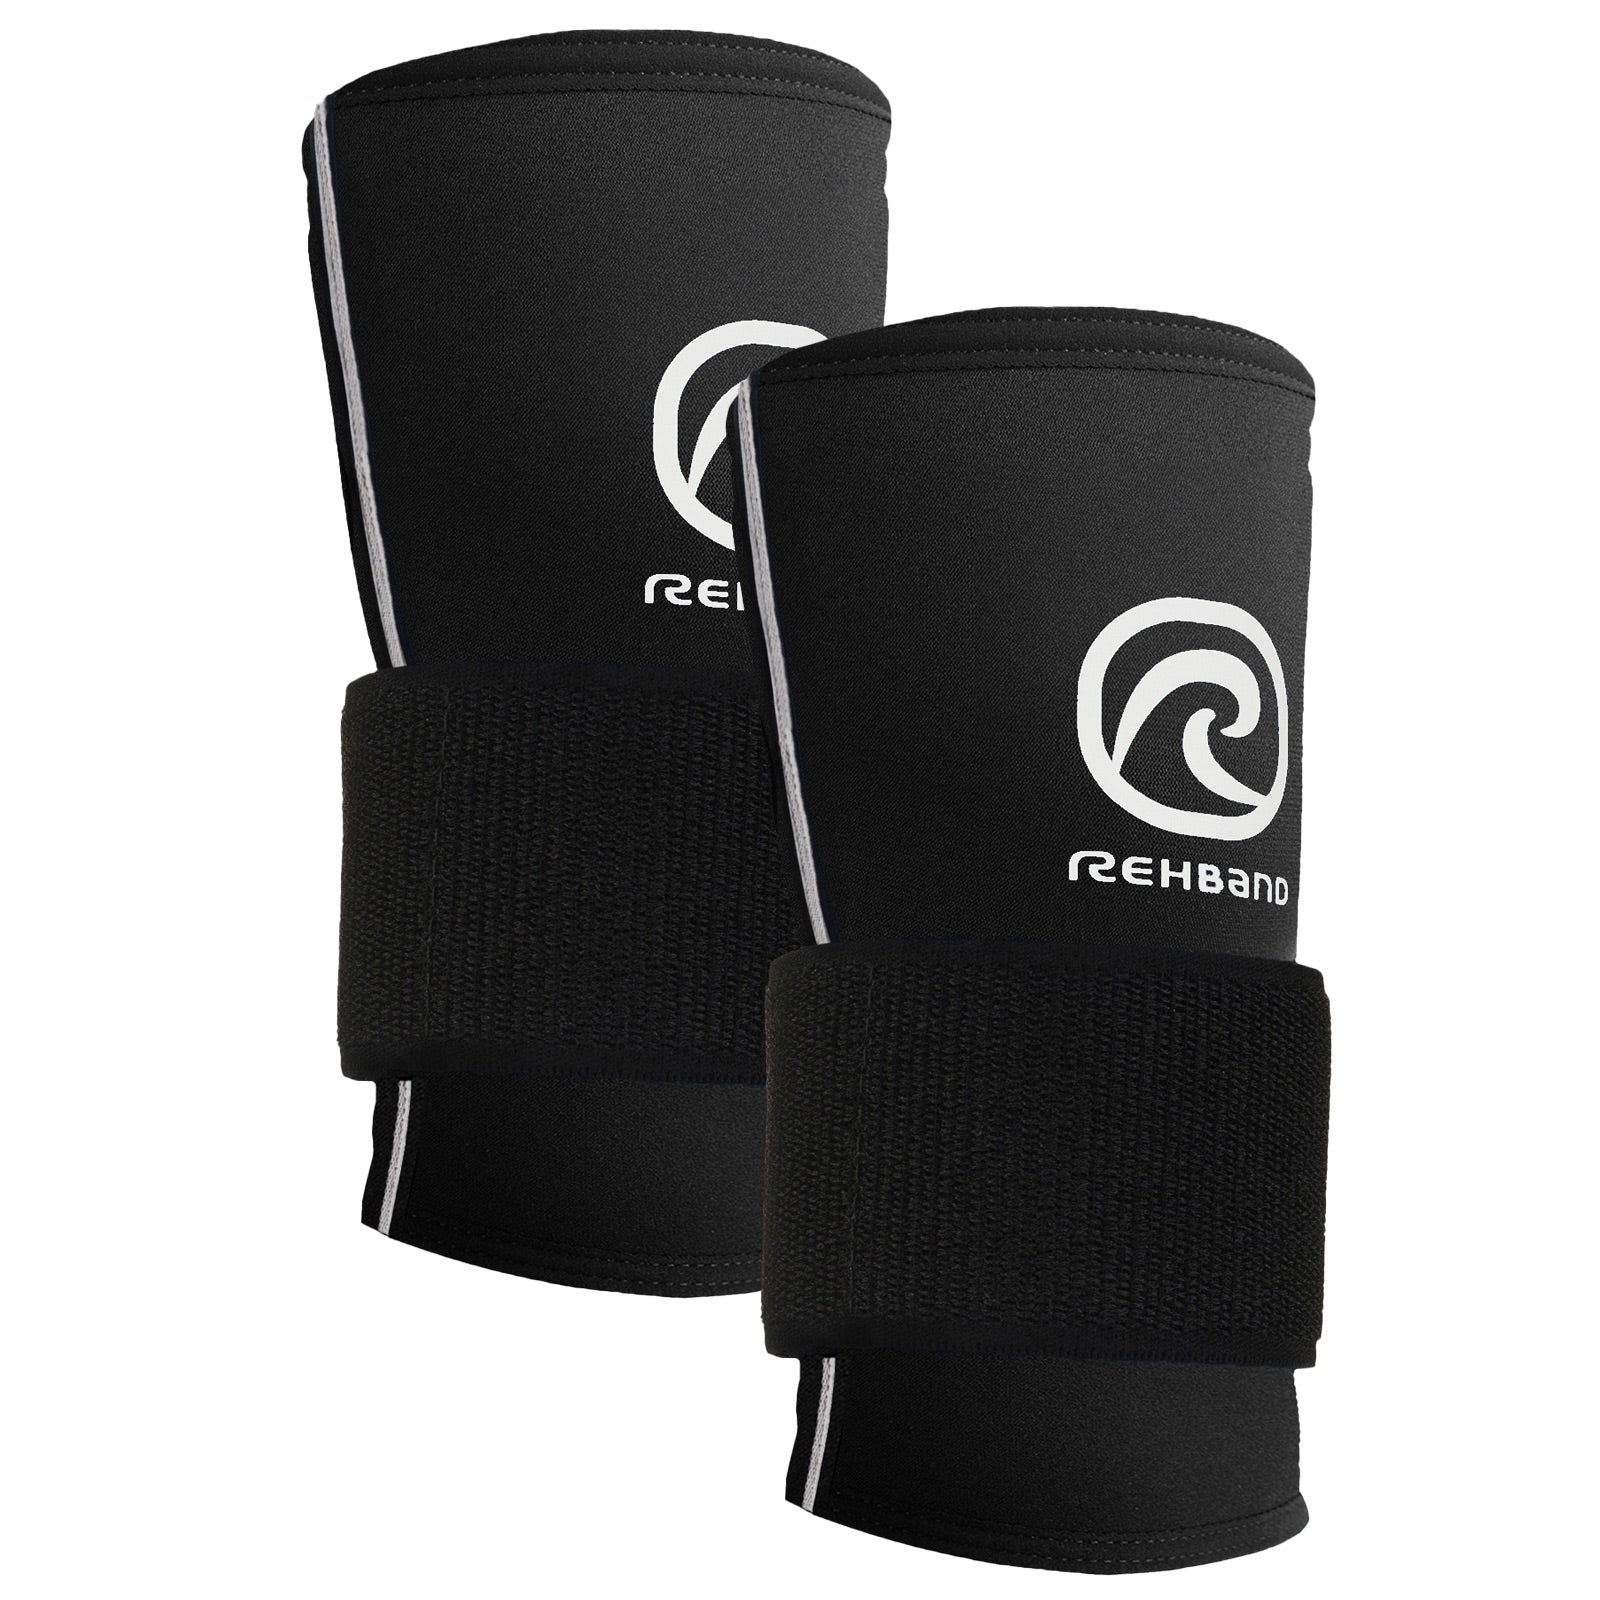 Two black wrist supports with a white Rehband logo at the top and an adjuster